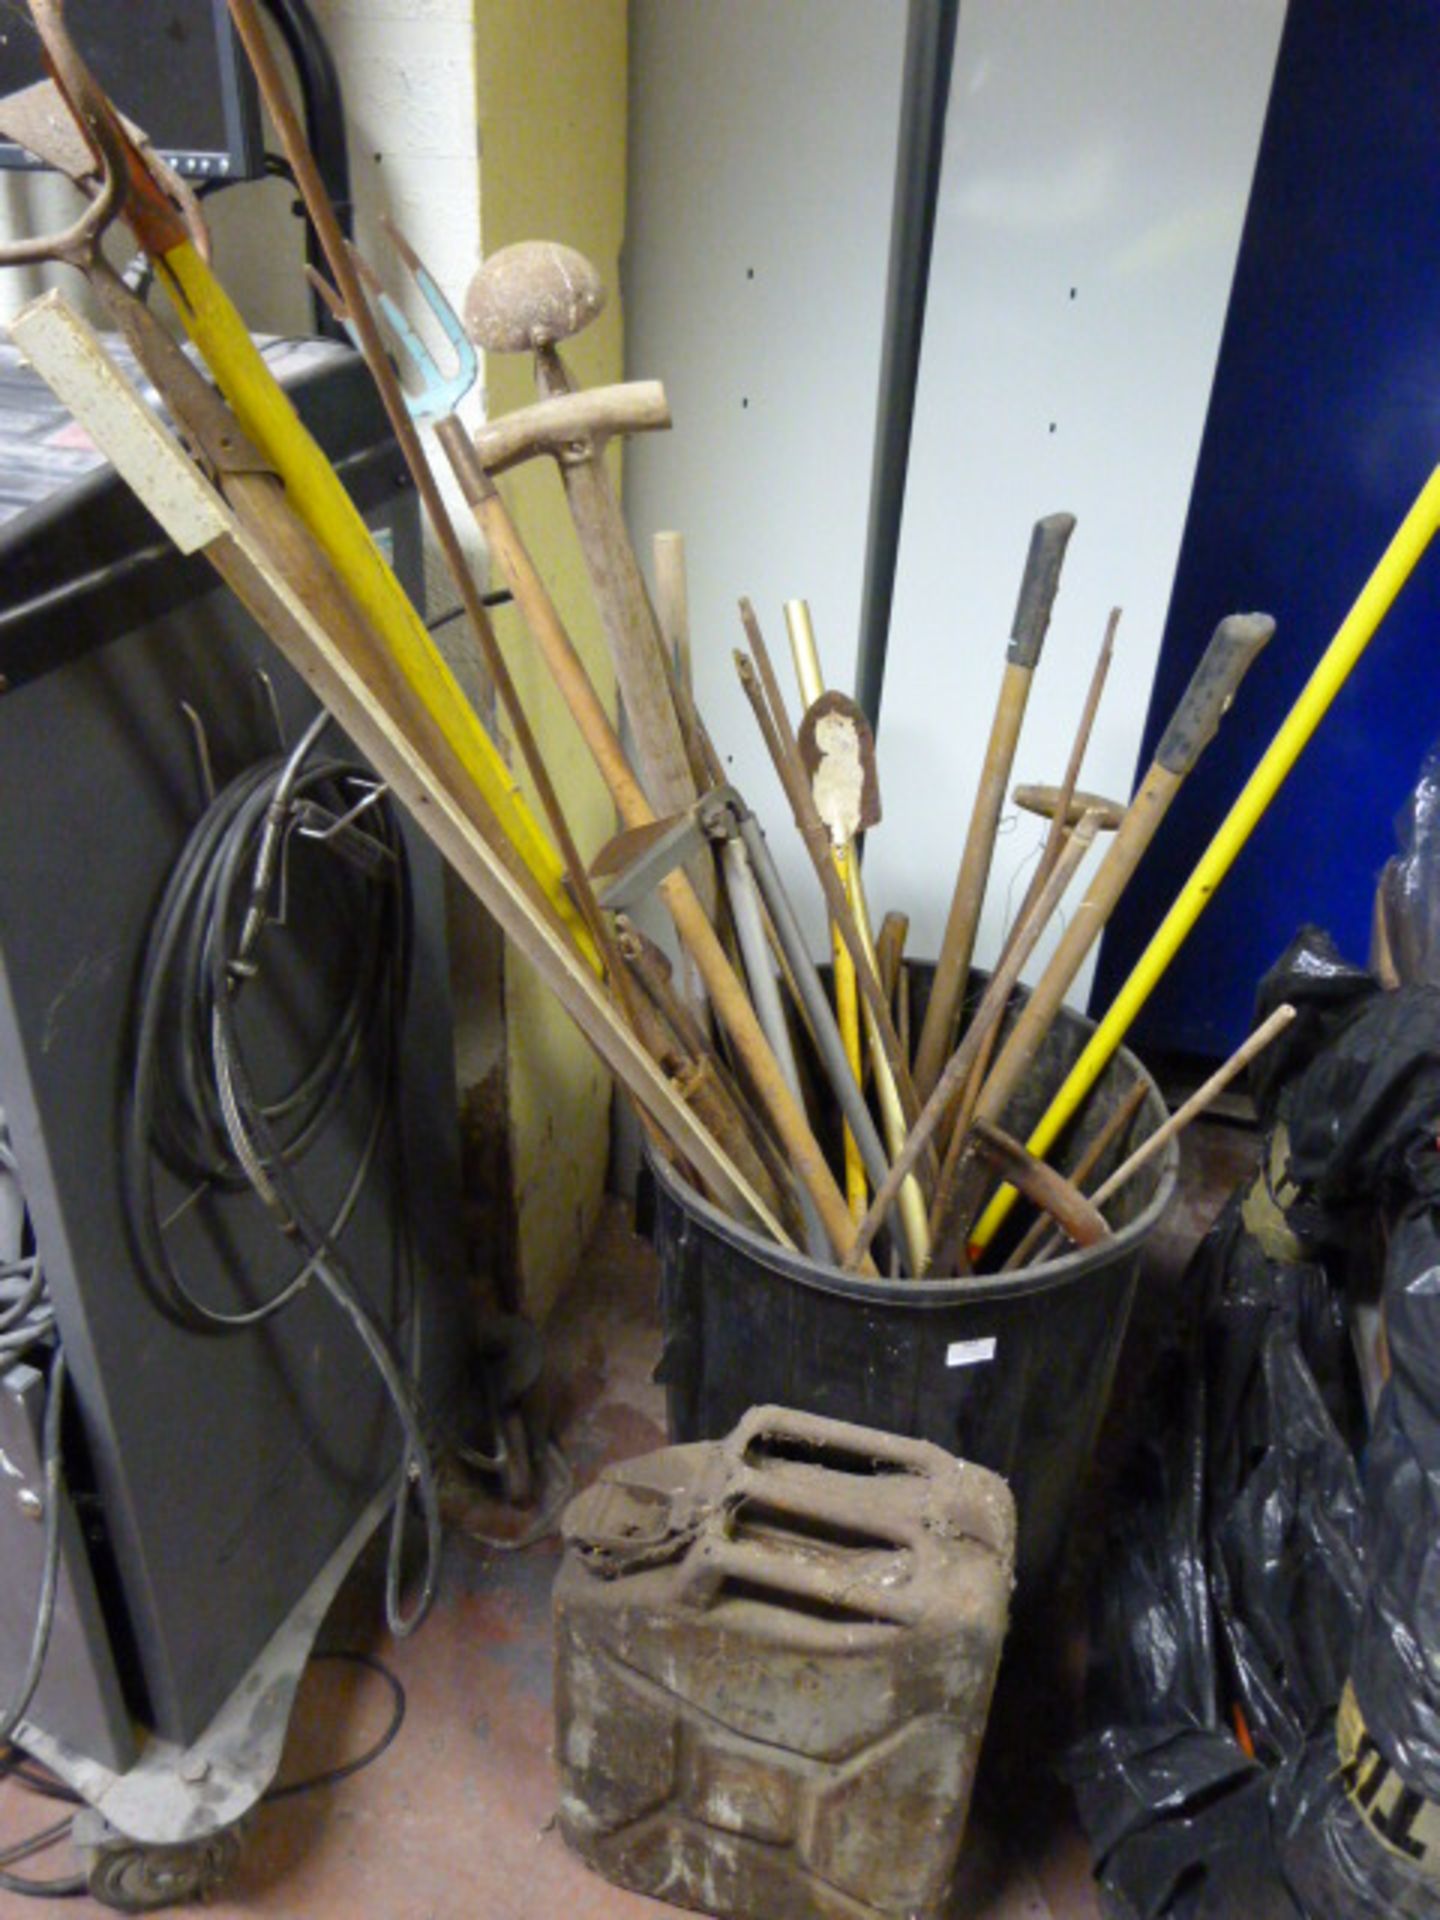 Plastic Bin Containing Assorted Garden Tools and a